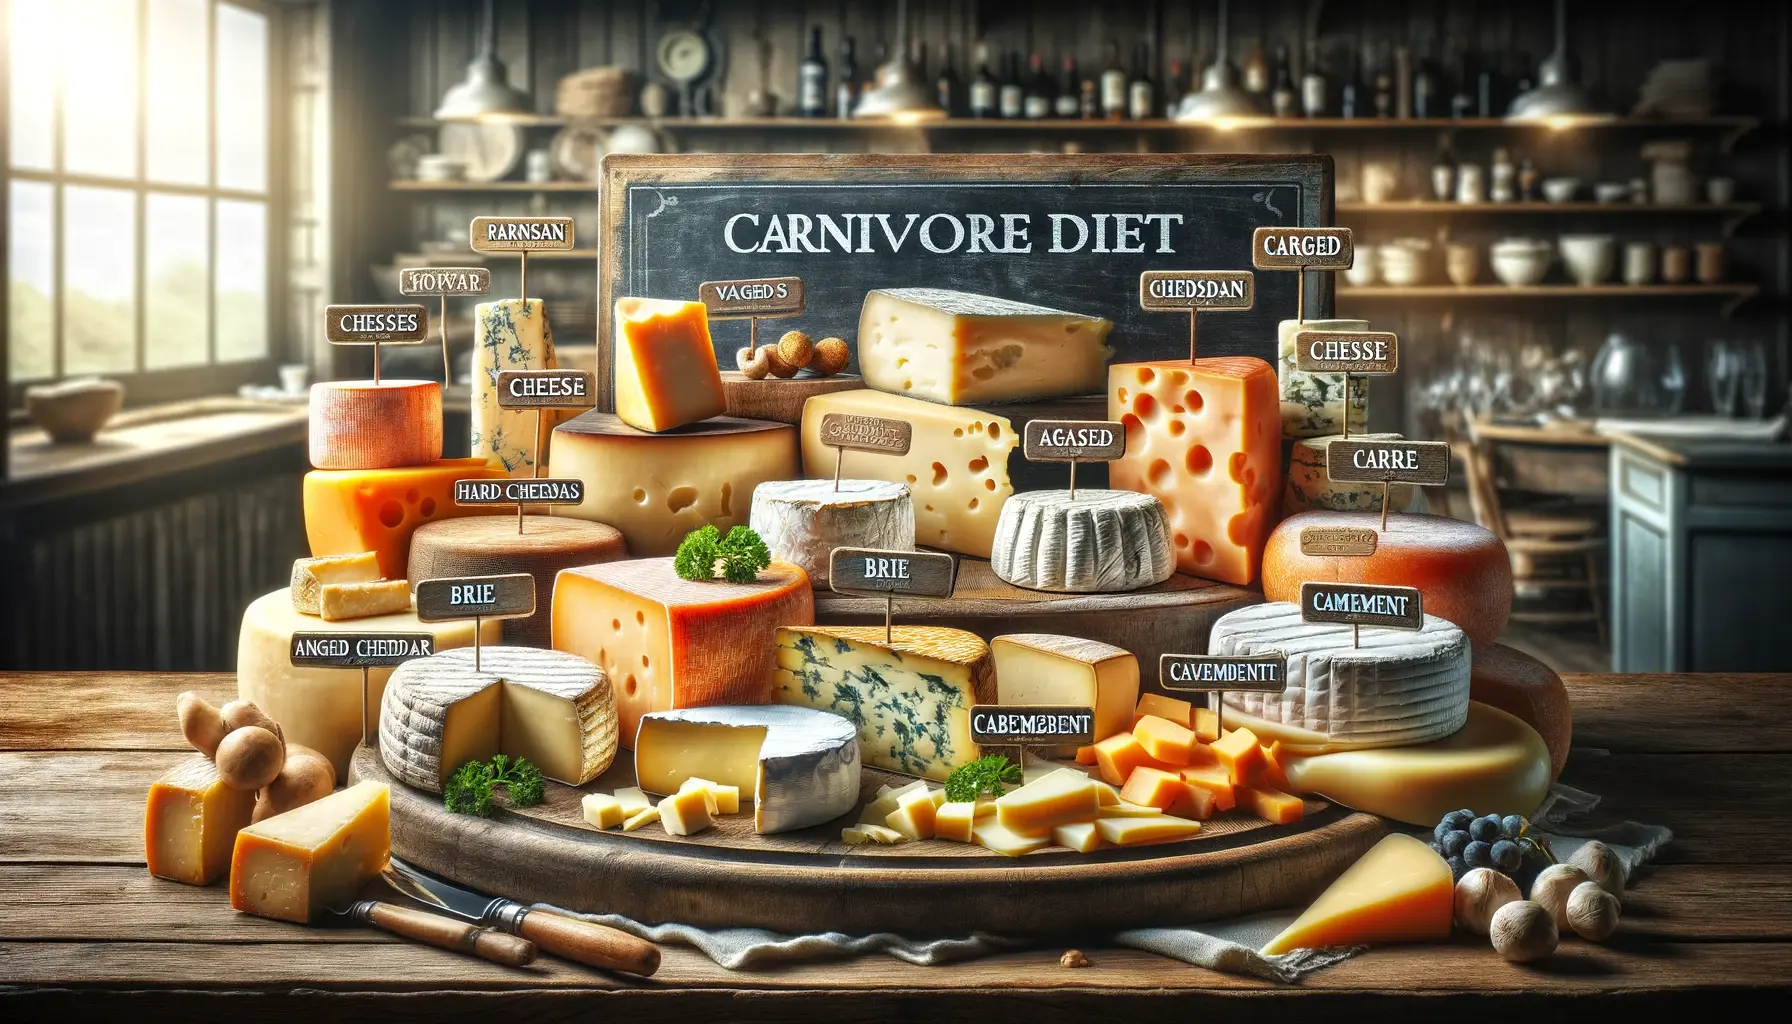 An image depicting various types of cheese suitable for a carnivore diet, including hard cheeses like Parmesan and Cheddar, aged cheeses,